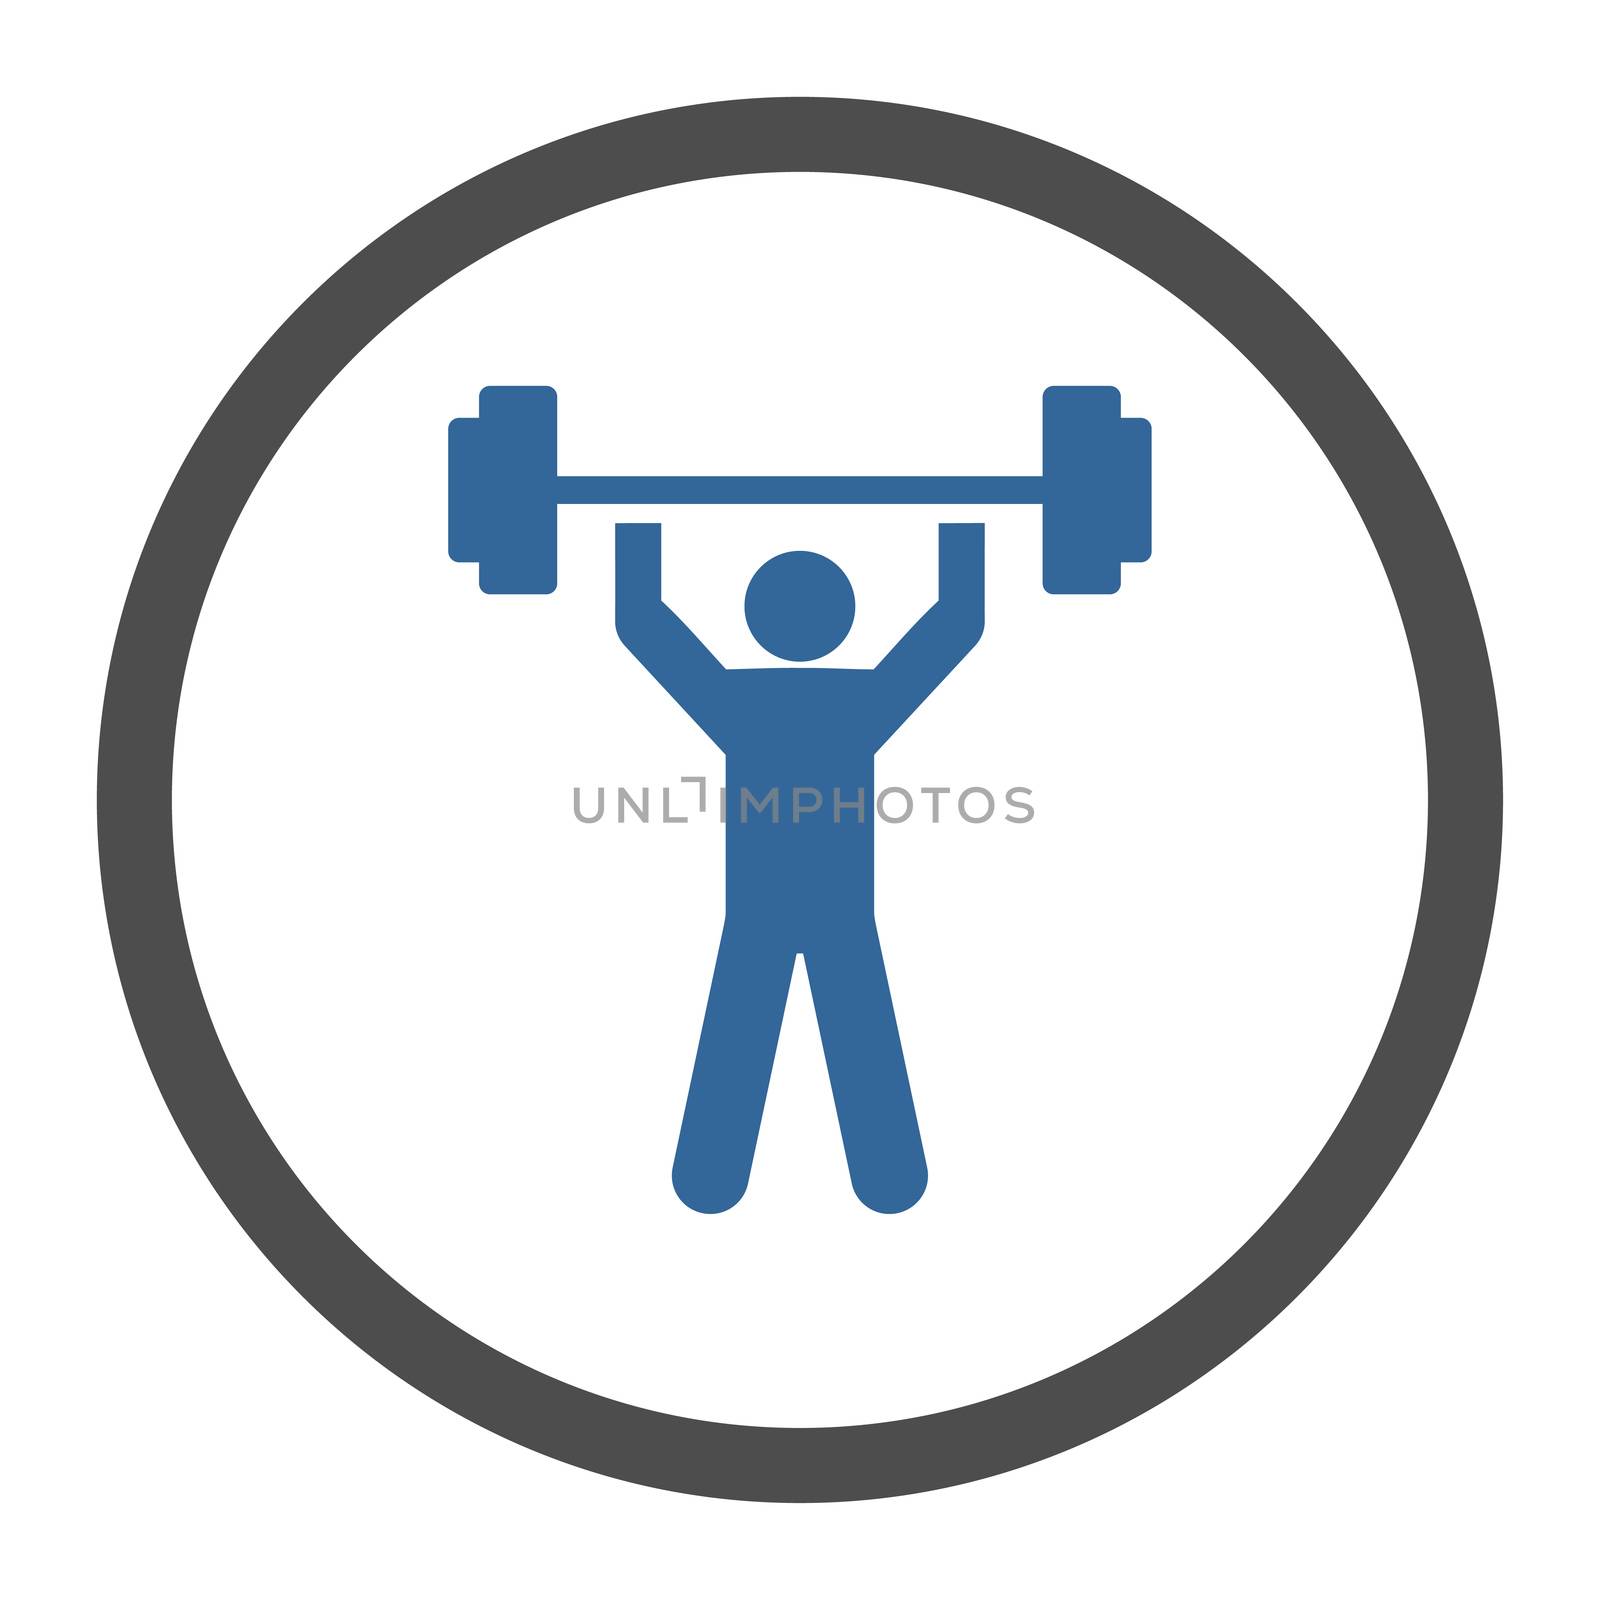 Power lifting glyph icon. This rounded flat symbol is drawn with cobalt and gray colors on a white background.